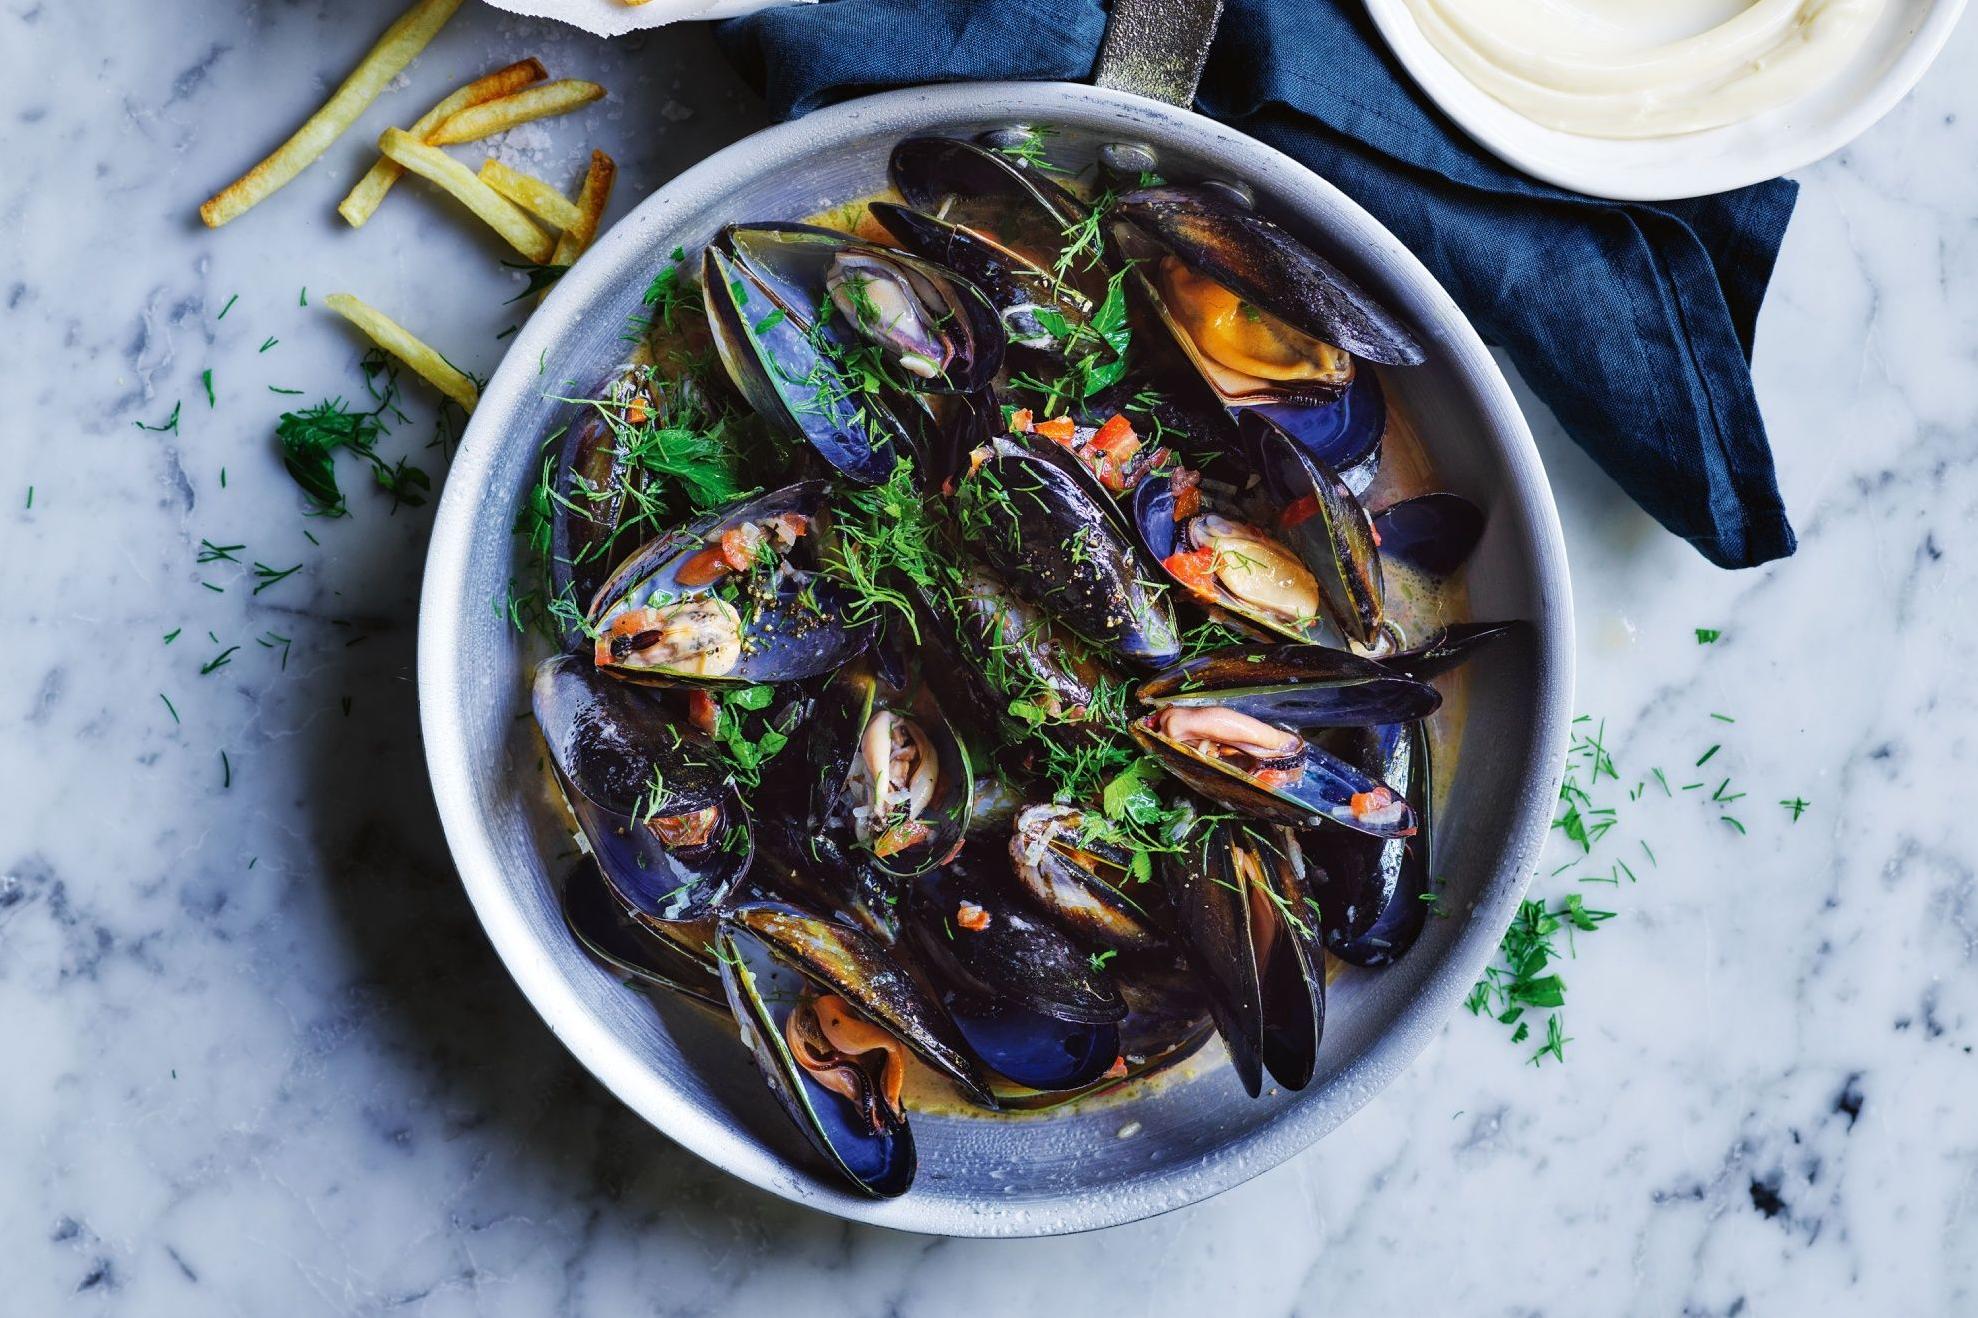  Dive into our mouth-watering mussels with tomato wine broth!